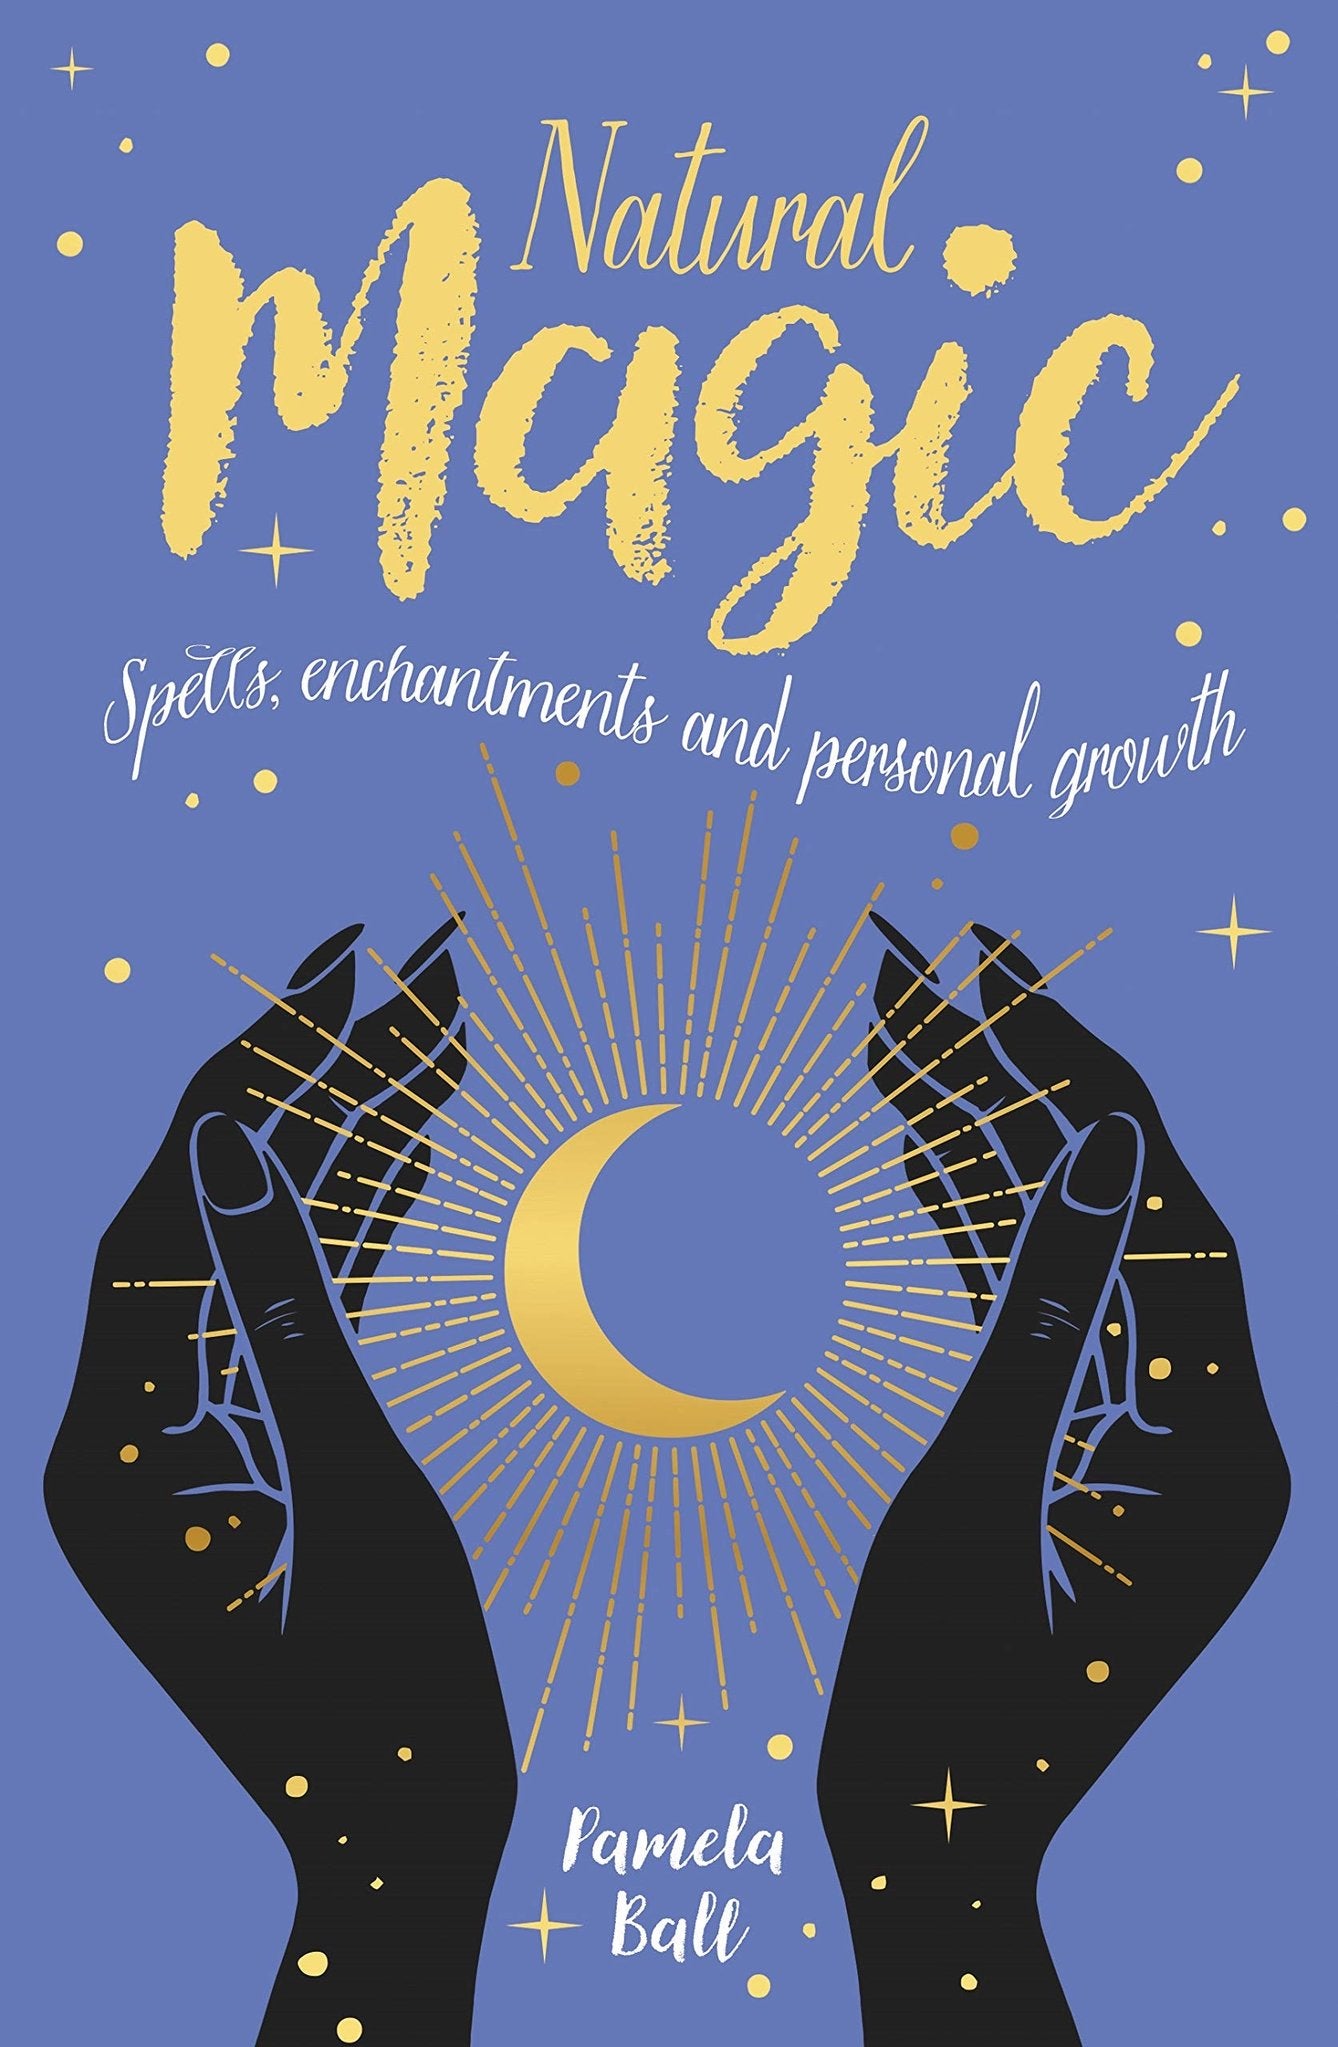 Book cover of Natural Magic, spells, enchantments, and personal growth by Pamela Ball.